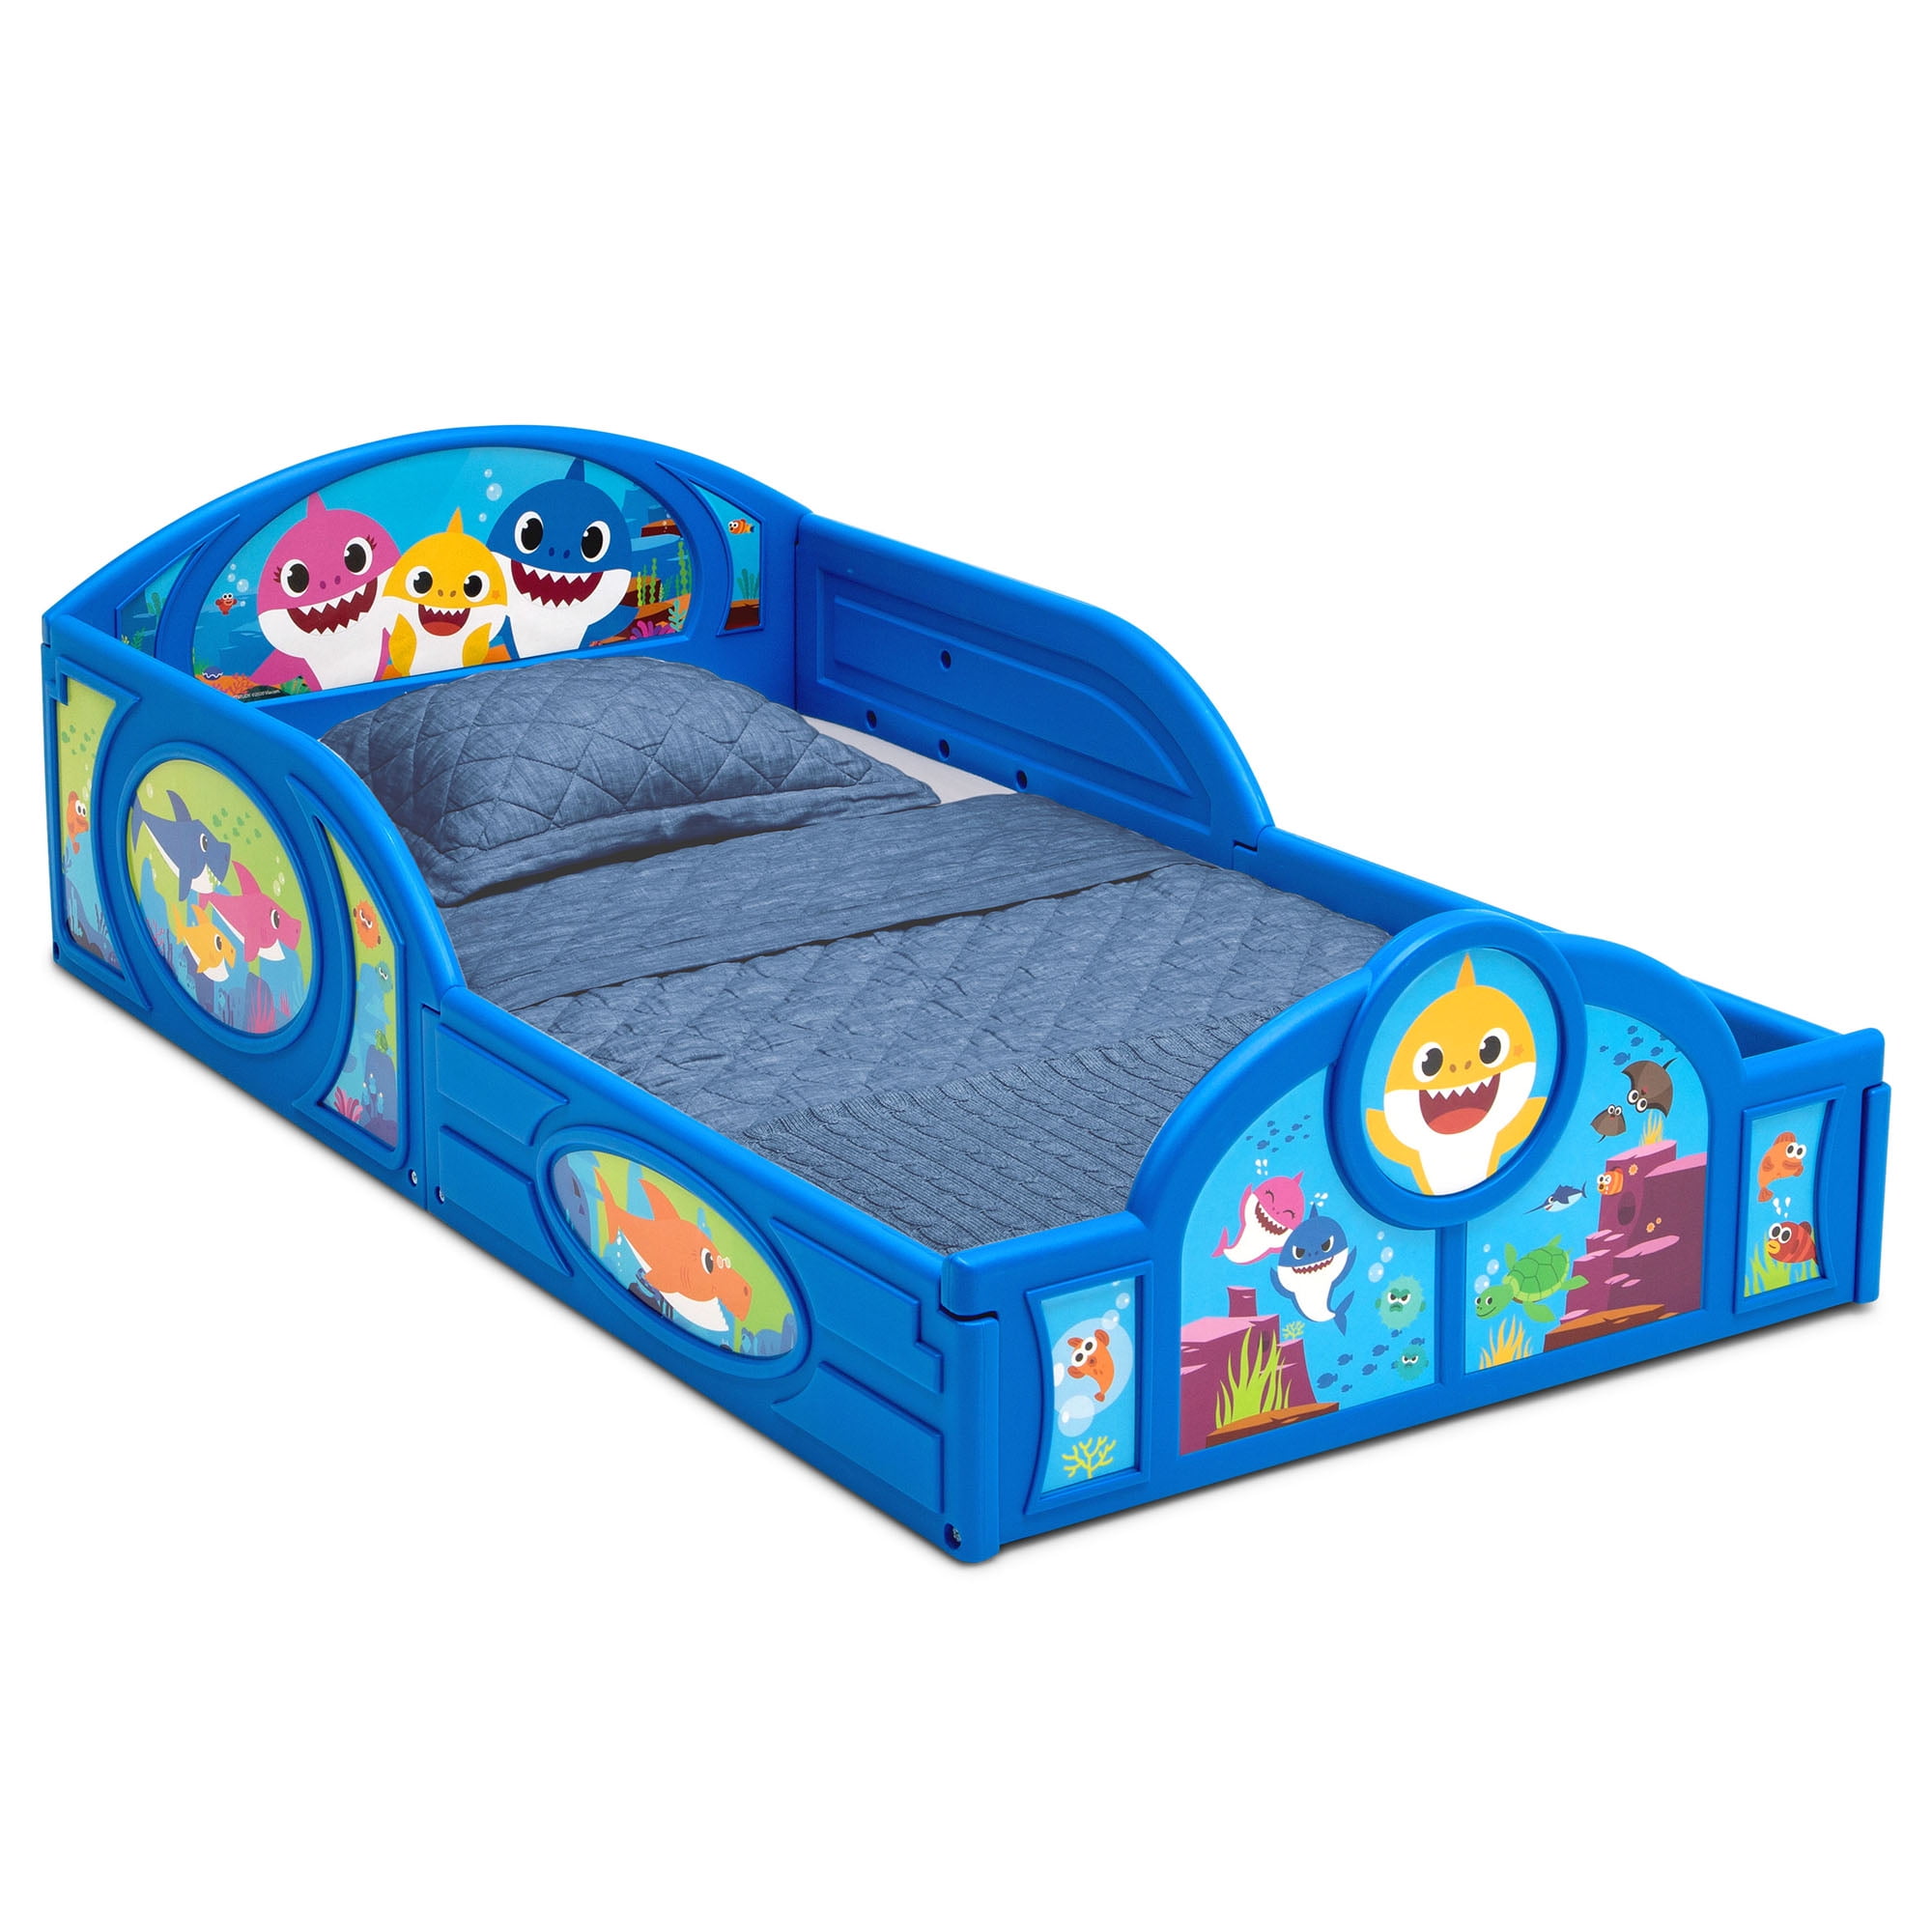 Baby Shark Plastic Sleep and Play Plastic Toddler Bed with